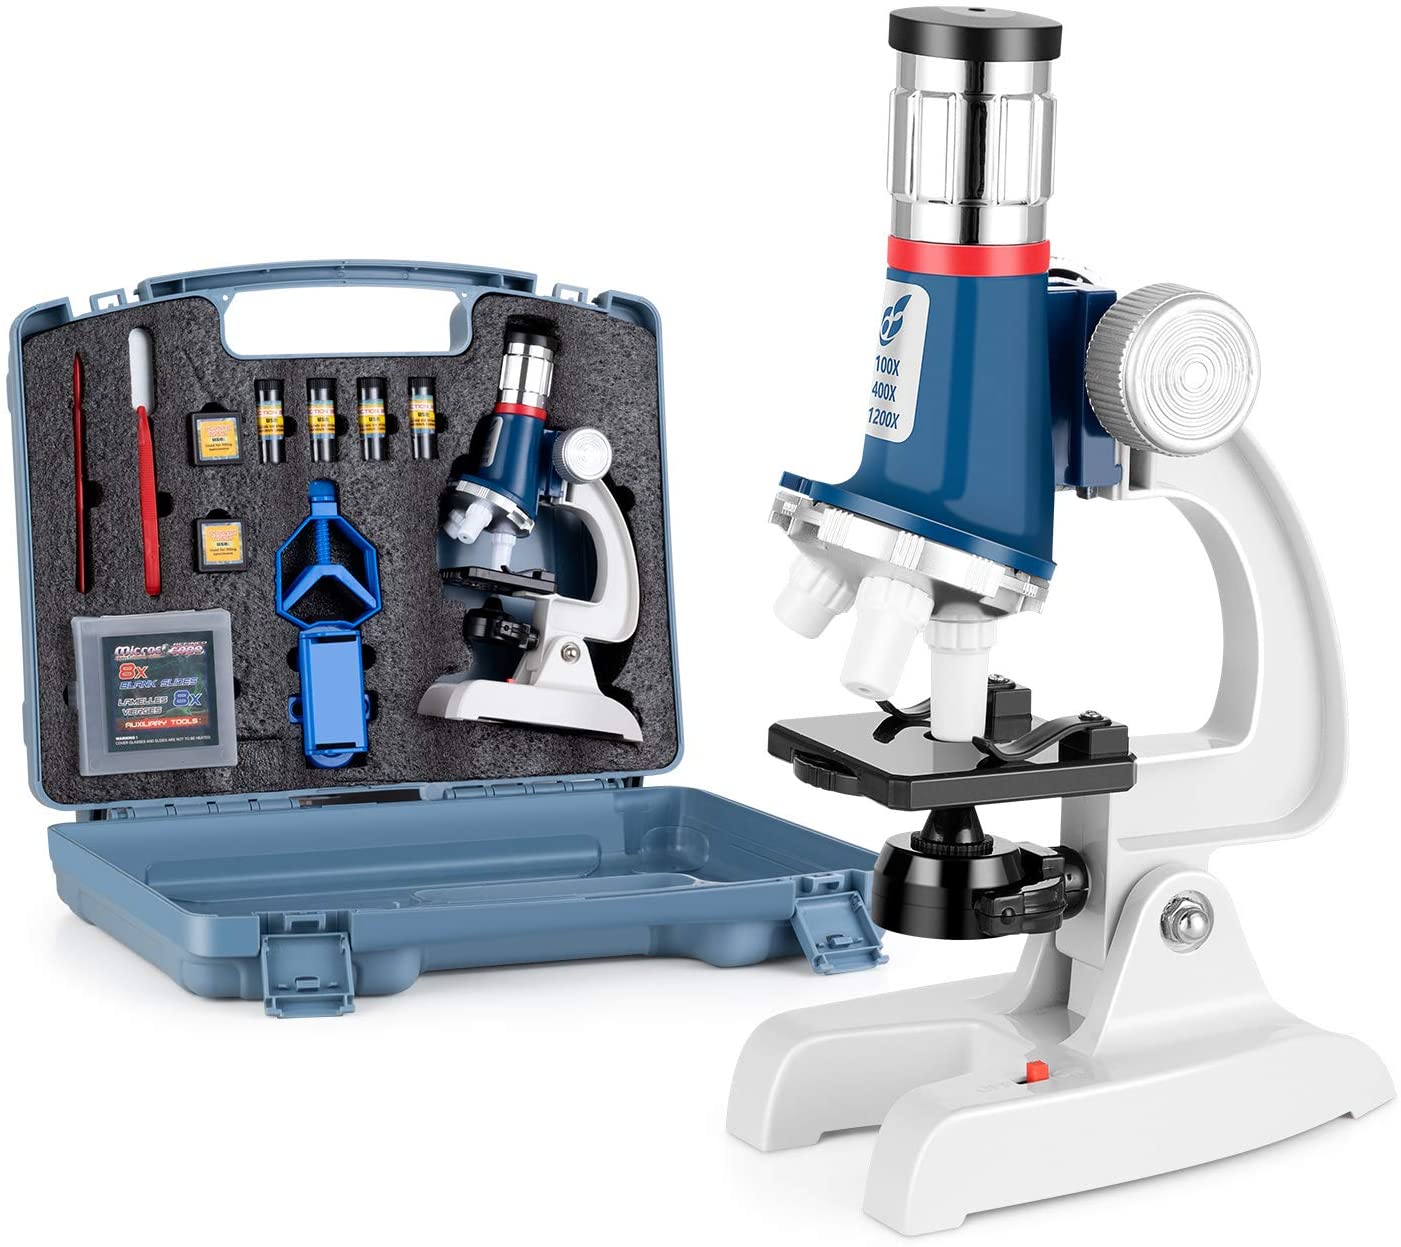 Review of Uarzt 100X-1200X Microscope Science Kit for Kids